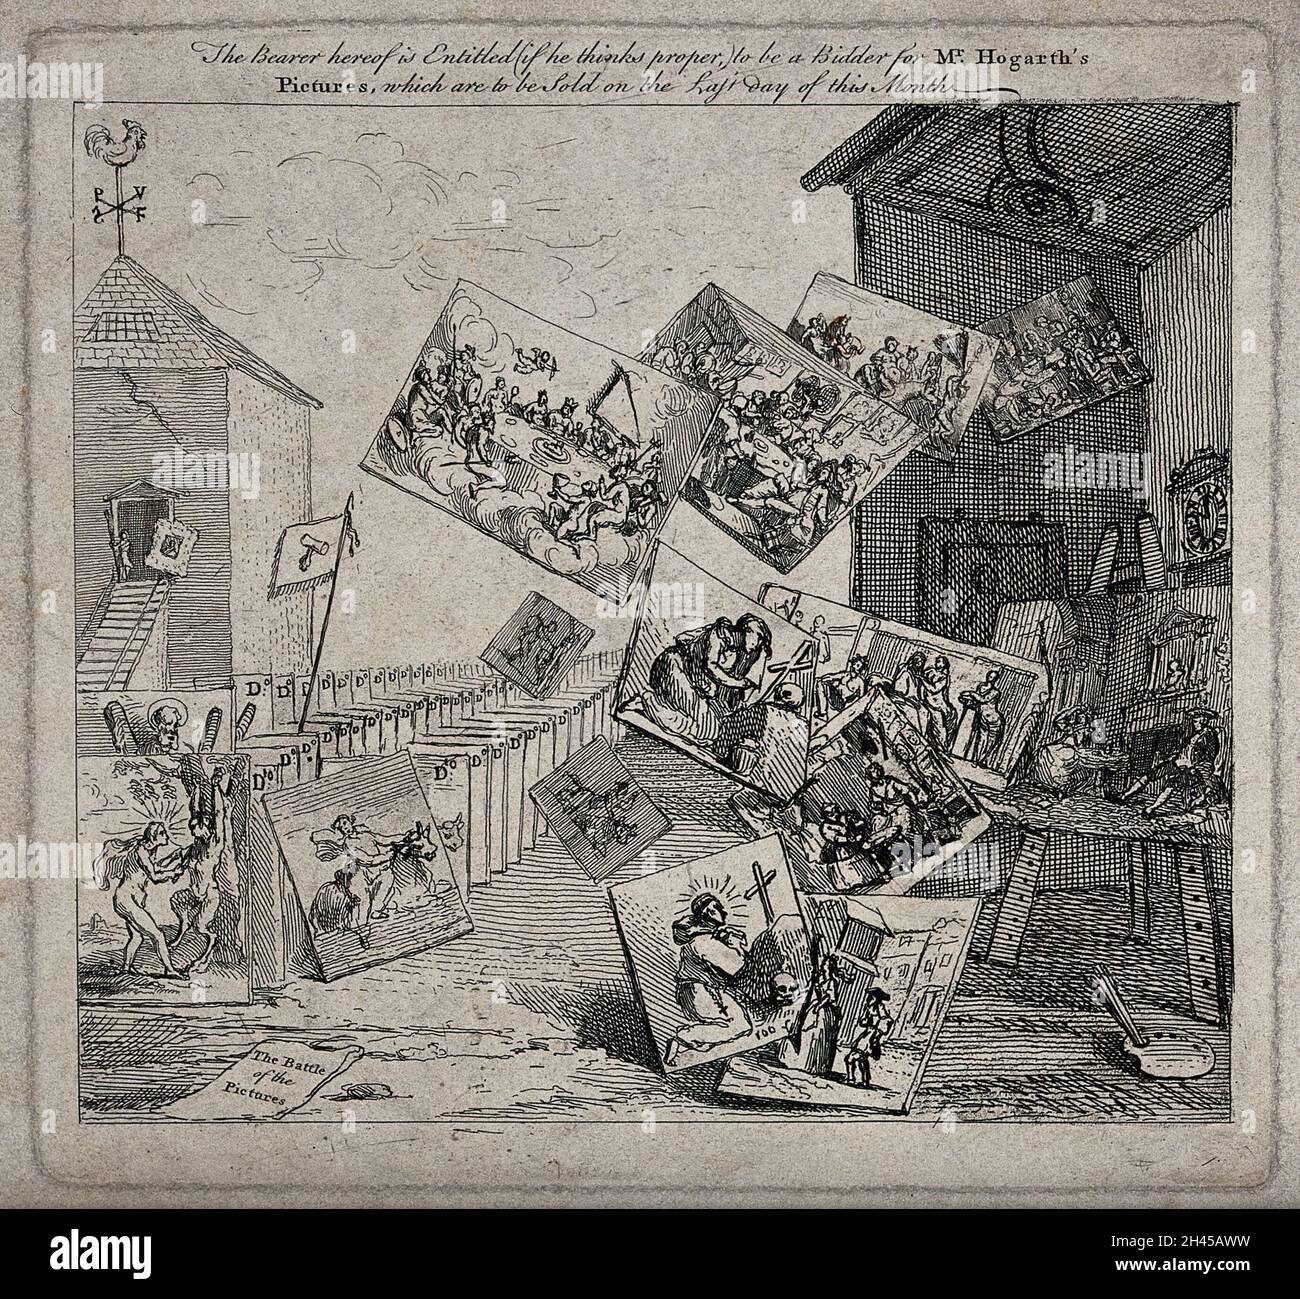 The battle of the pictures: between an auction house and Hogarth's studio, old master paintings are lined up in ranks outnumbering and attacking Hogarth's contemporary counterparts. Etching by W. Hogarth. Stock Photo